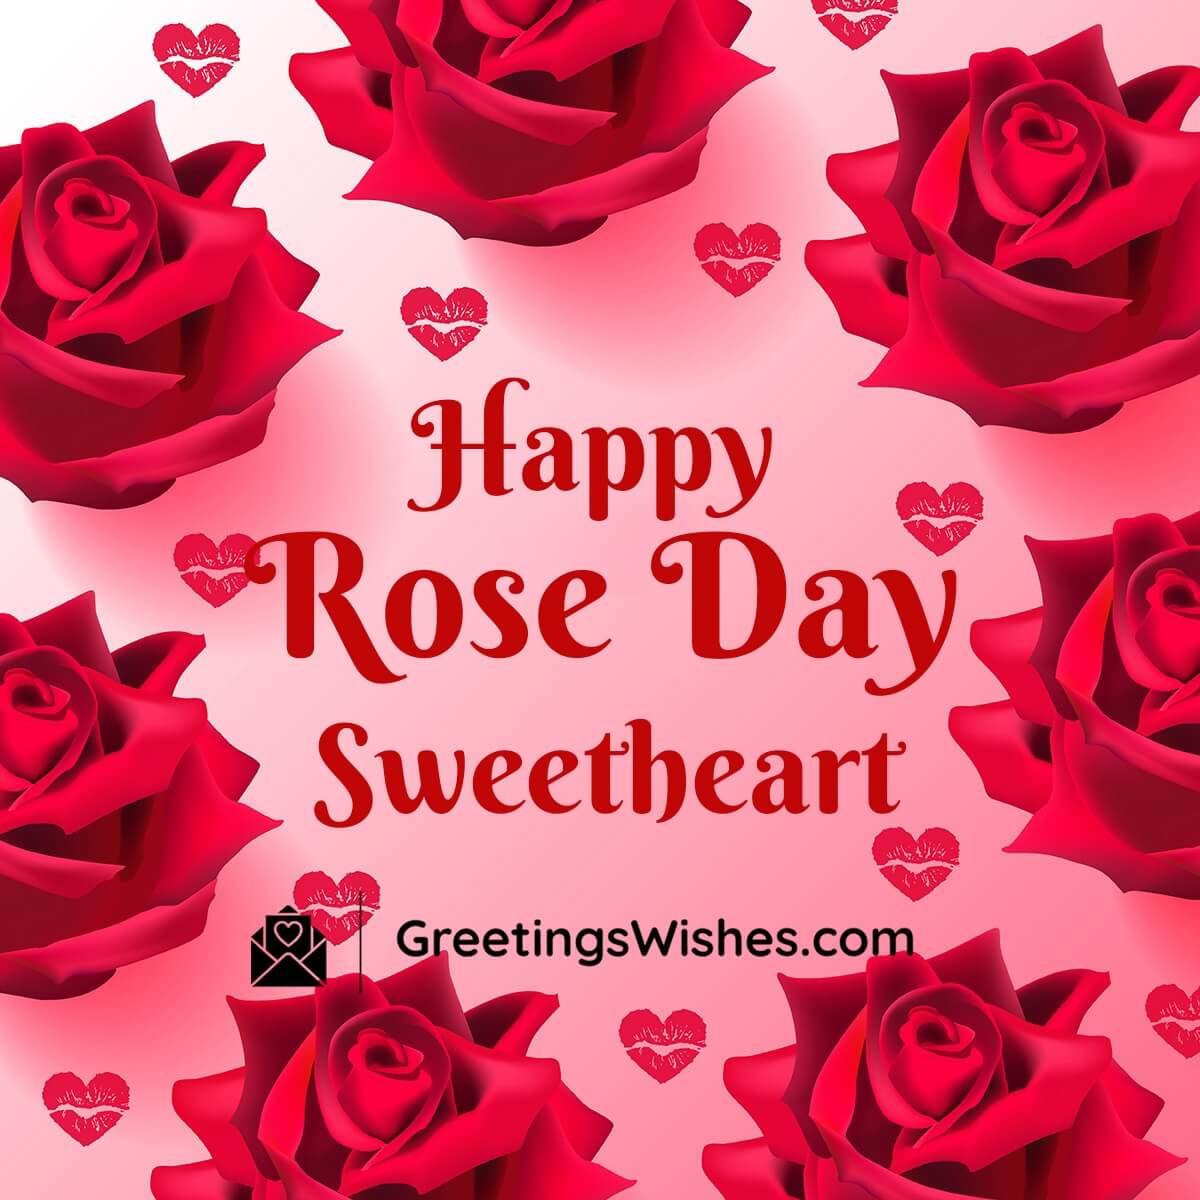 Happy Rose Day Sweetheart